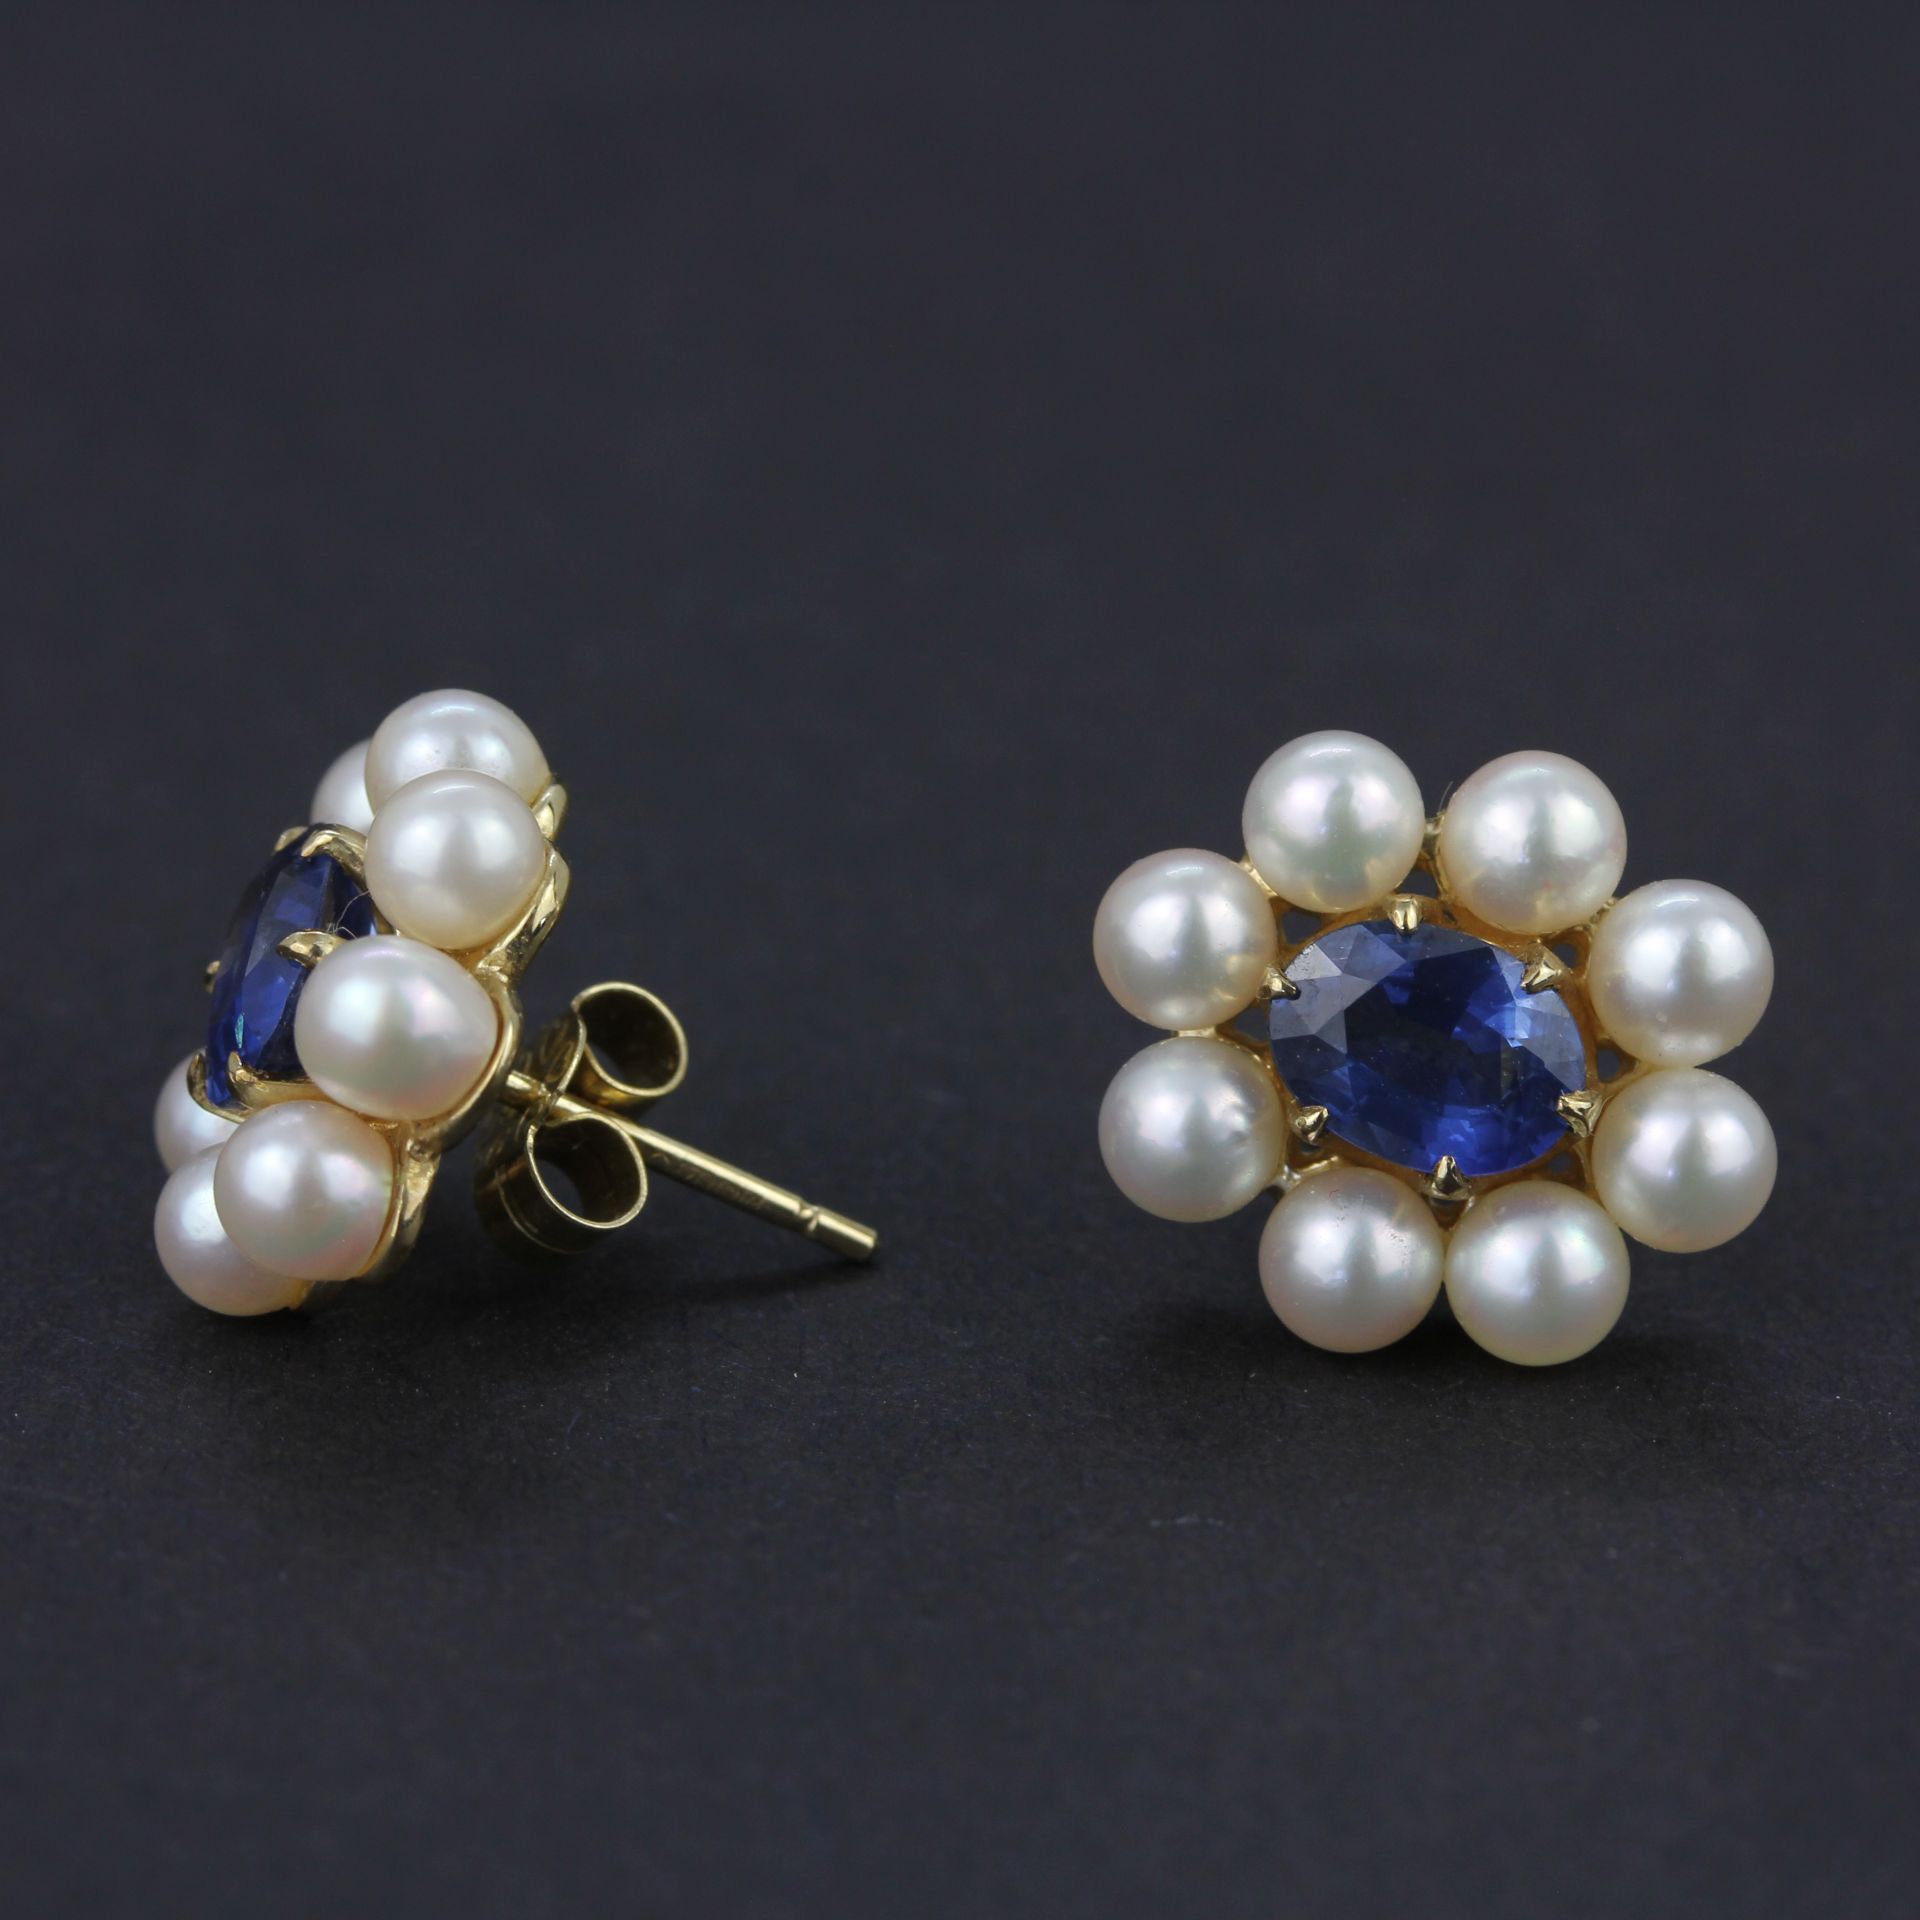 A pair of 9ct yellow gold earrings set with oval cut sapphires surrounded by pearls, L. 1.3cm. - Image 4 of 4